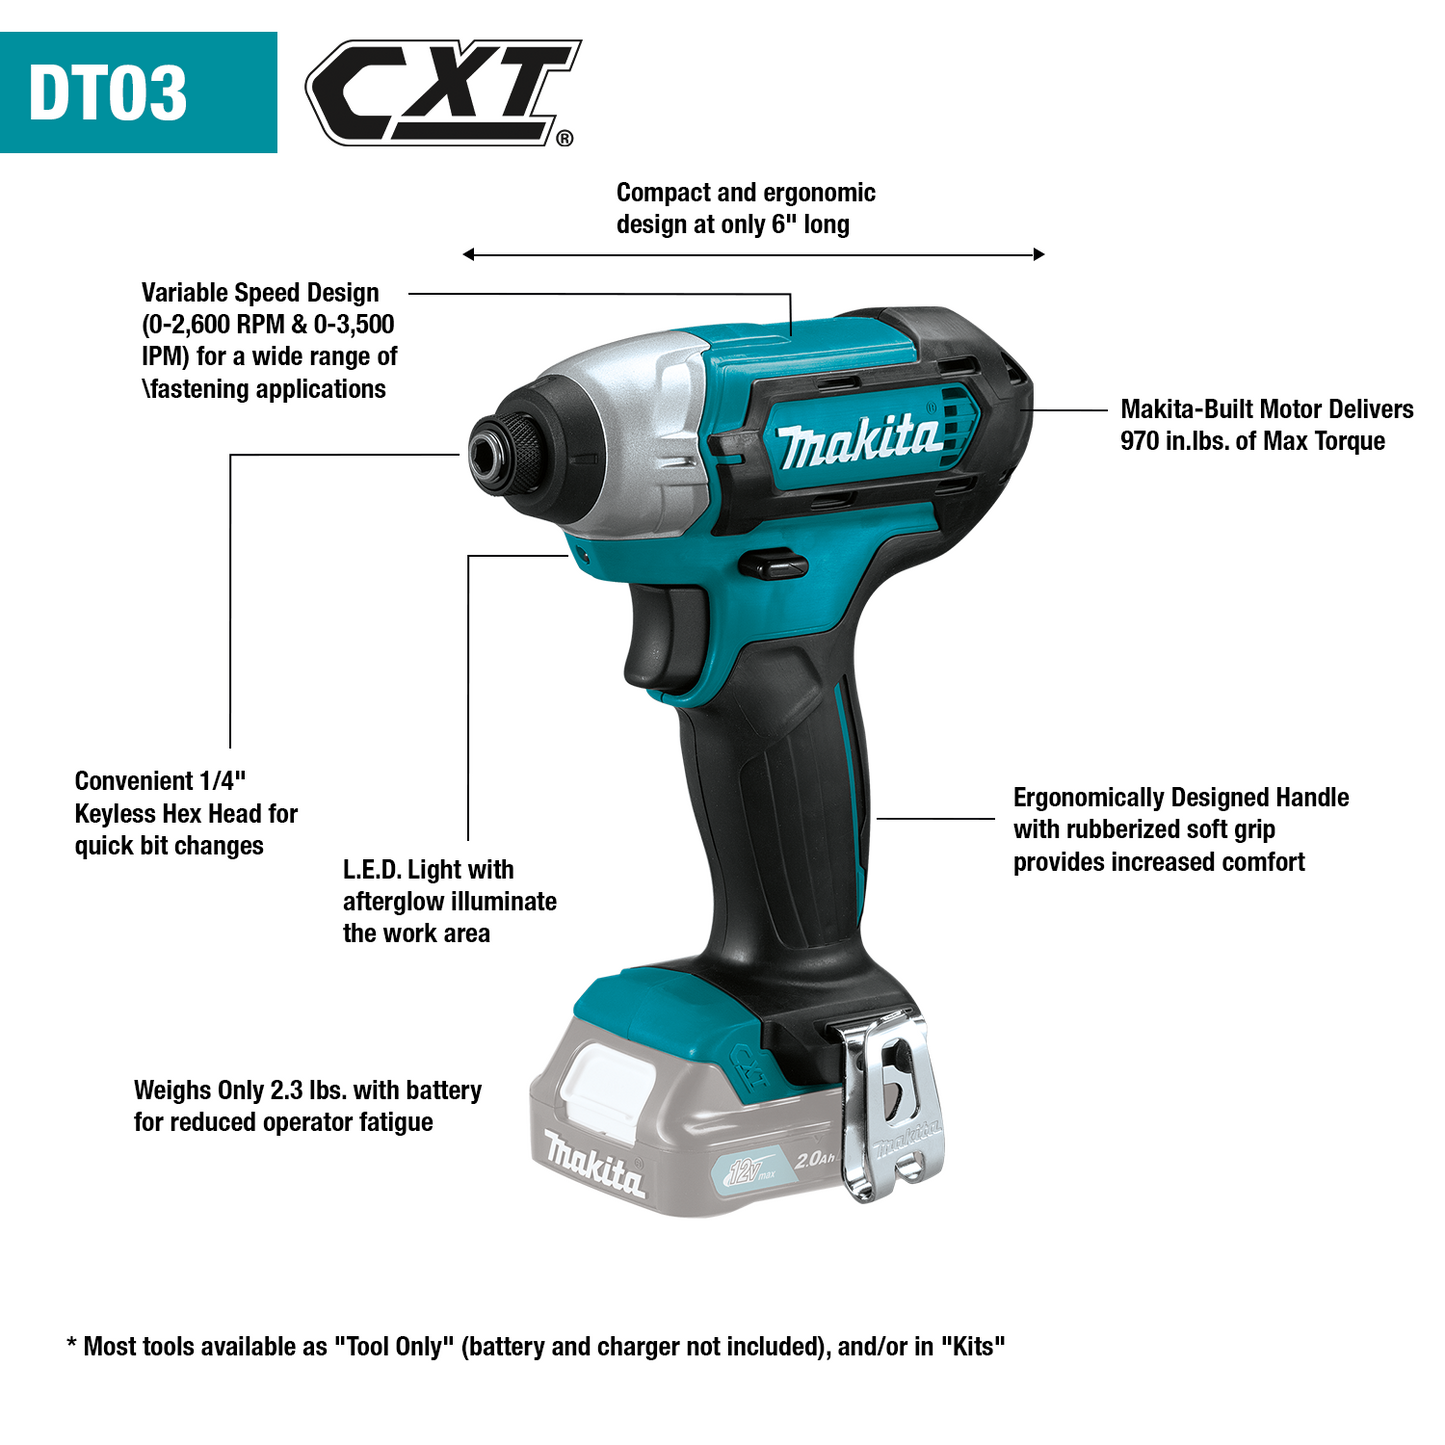 Makita 12 Volt Max Lithium Ion Cordless Impact Driver Factory Serviced (Tool Only)